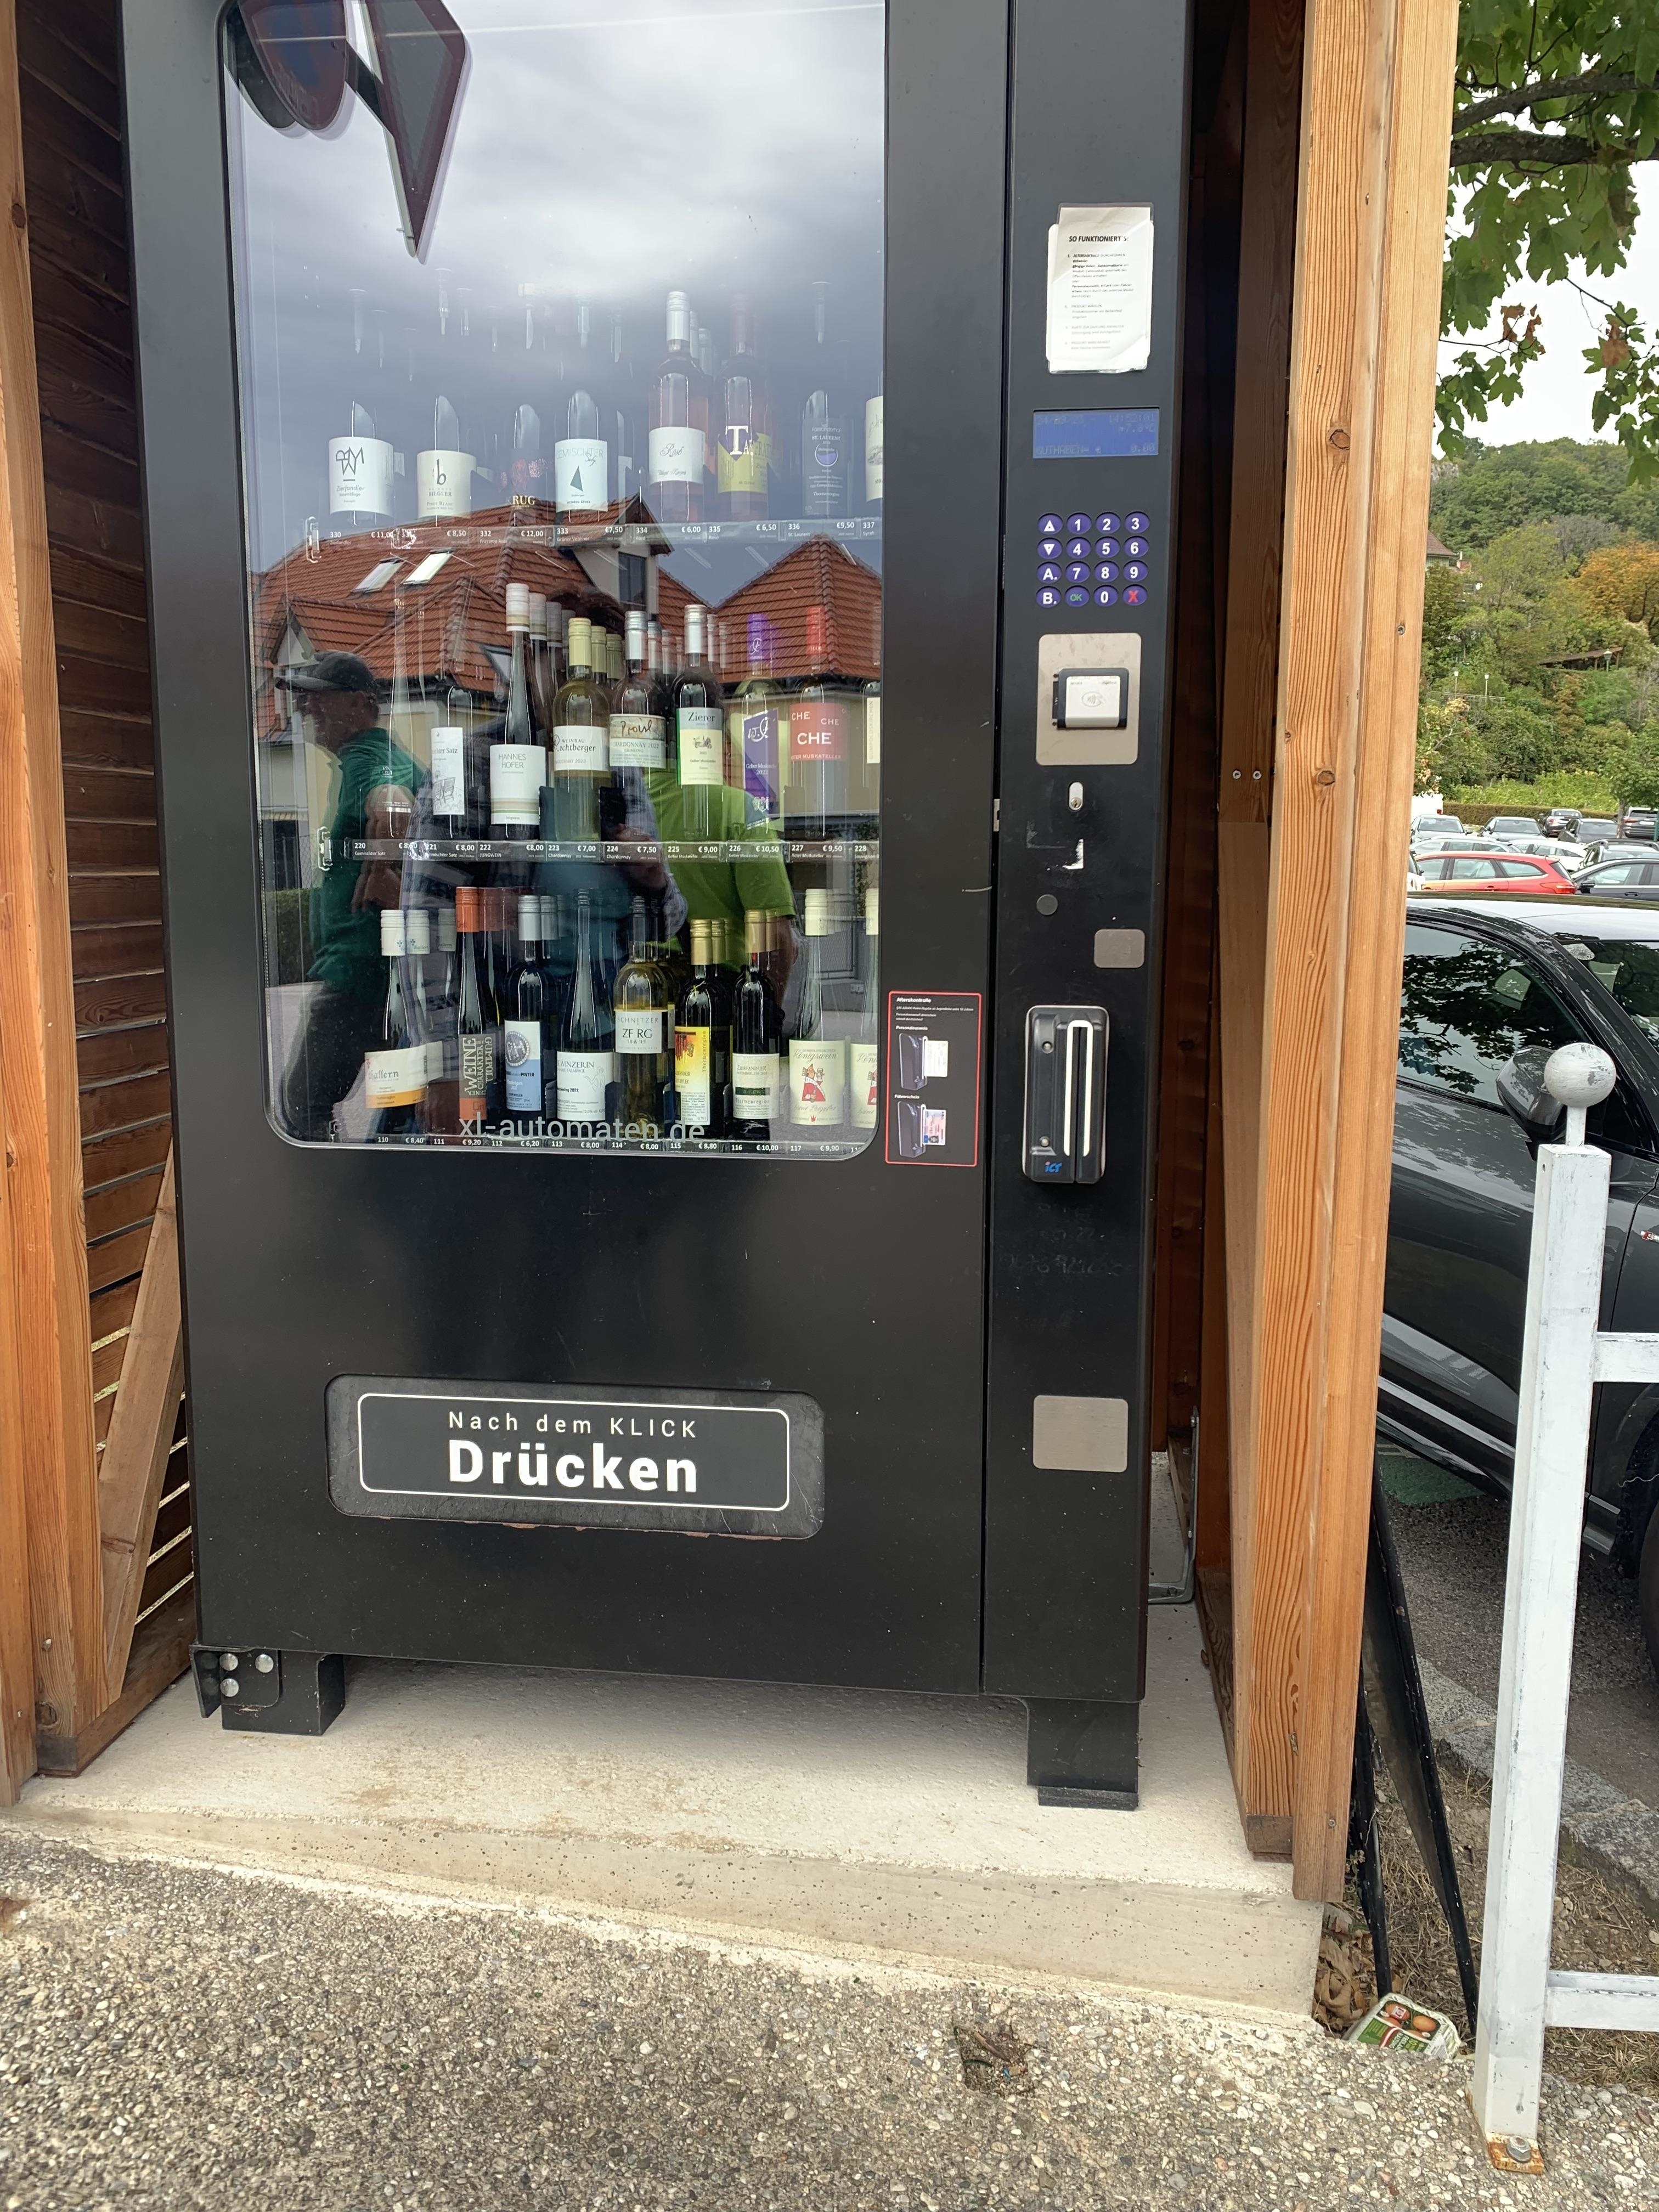 A vending machine containing bottles of wine